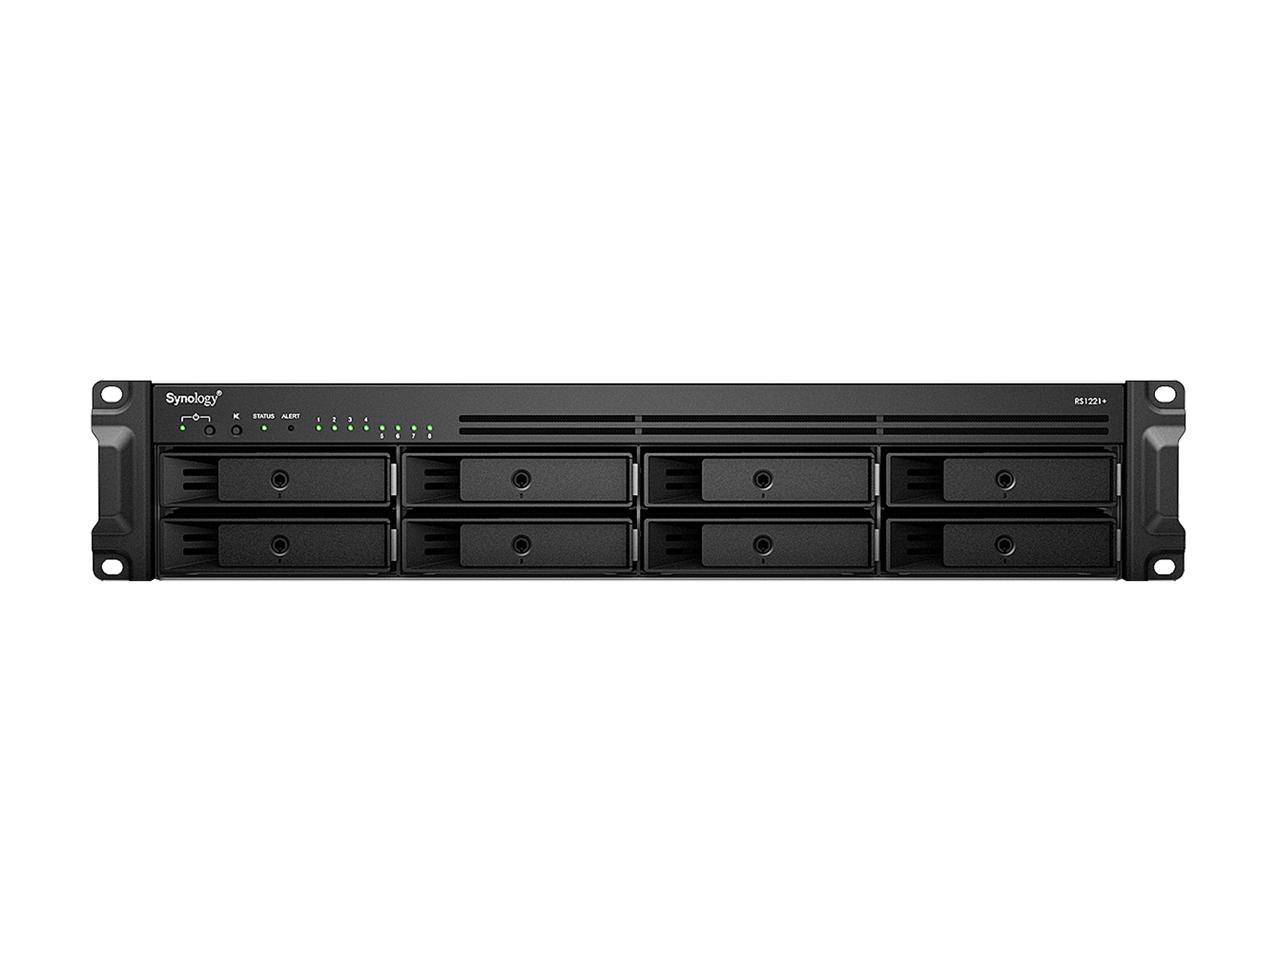 Synology RS1221+ RackStation with 8GB RAM and 32TB (8 x 4TB) of Synology Plus NAS Drives Fully Assembled and Tested